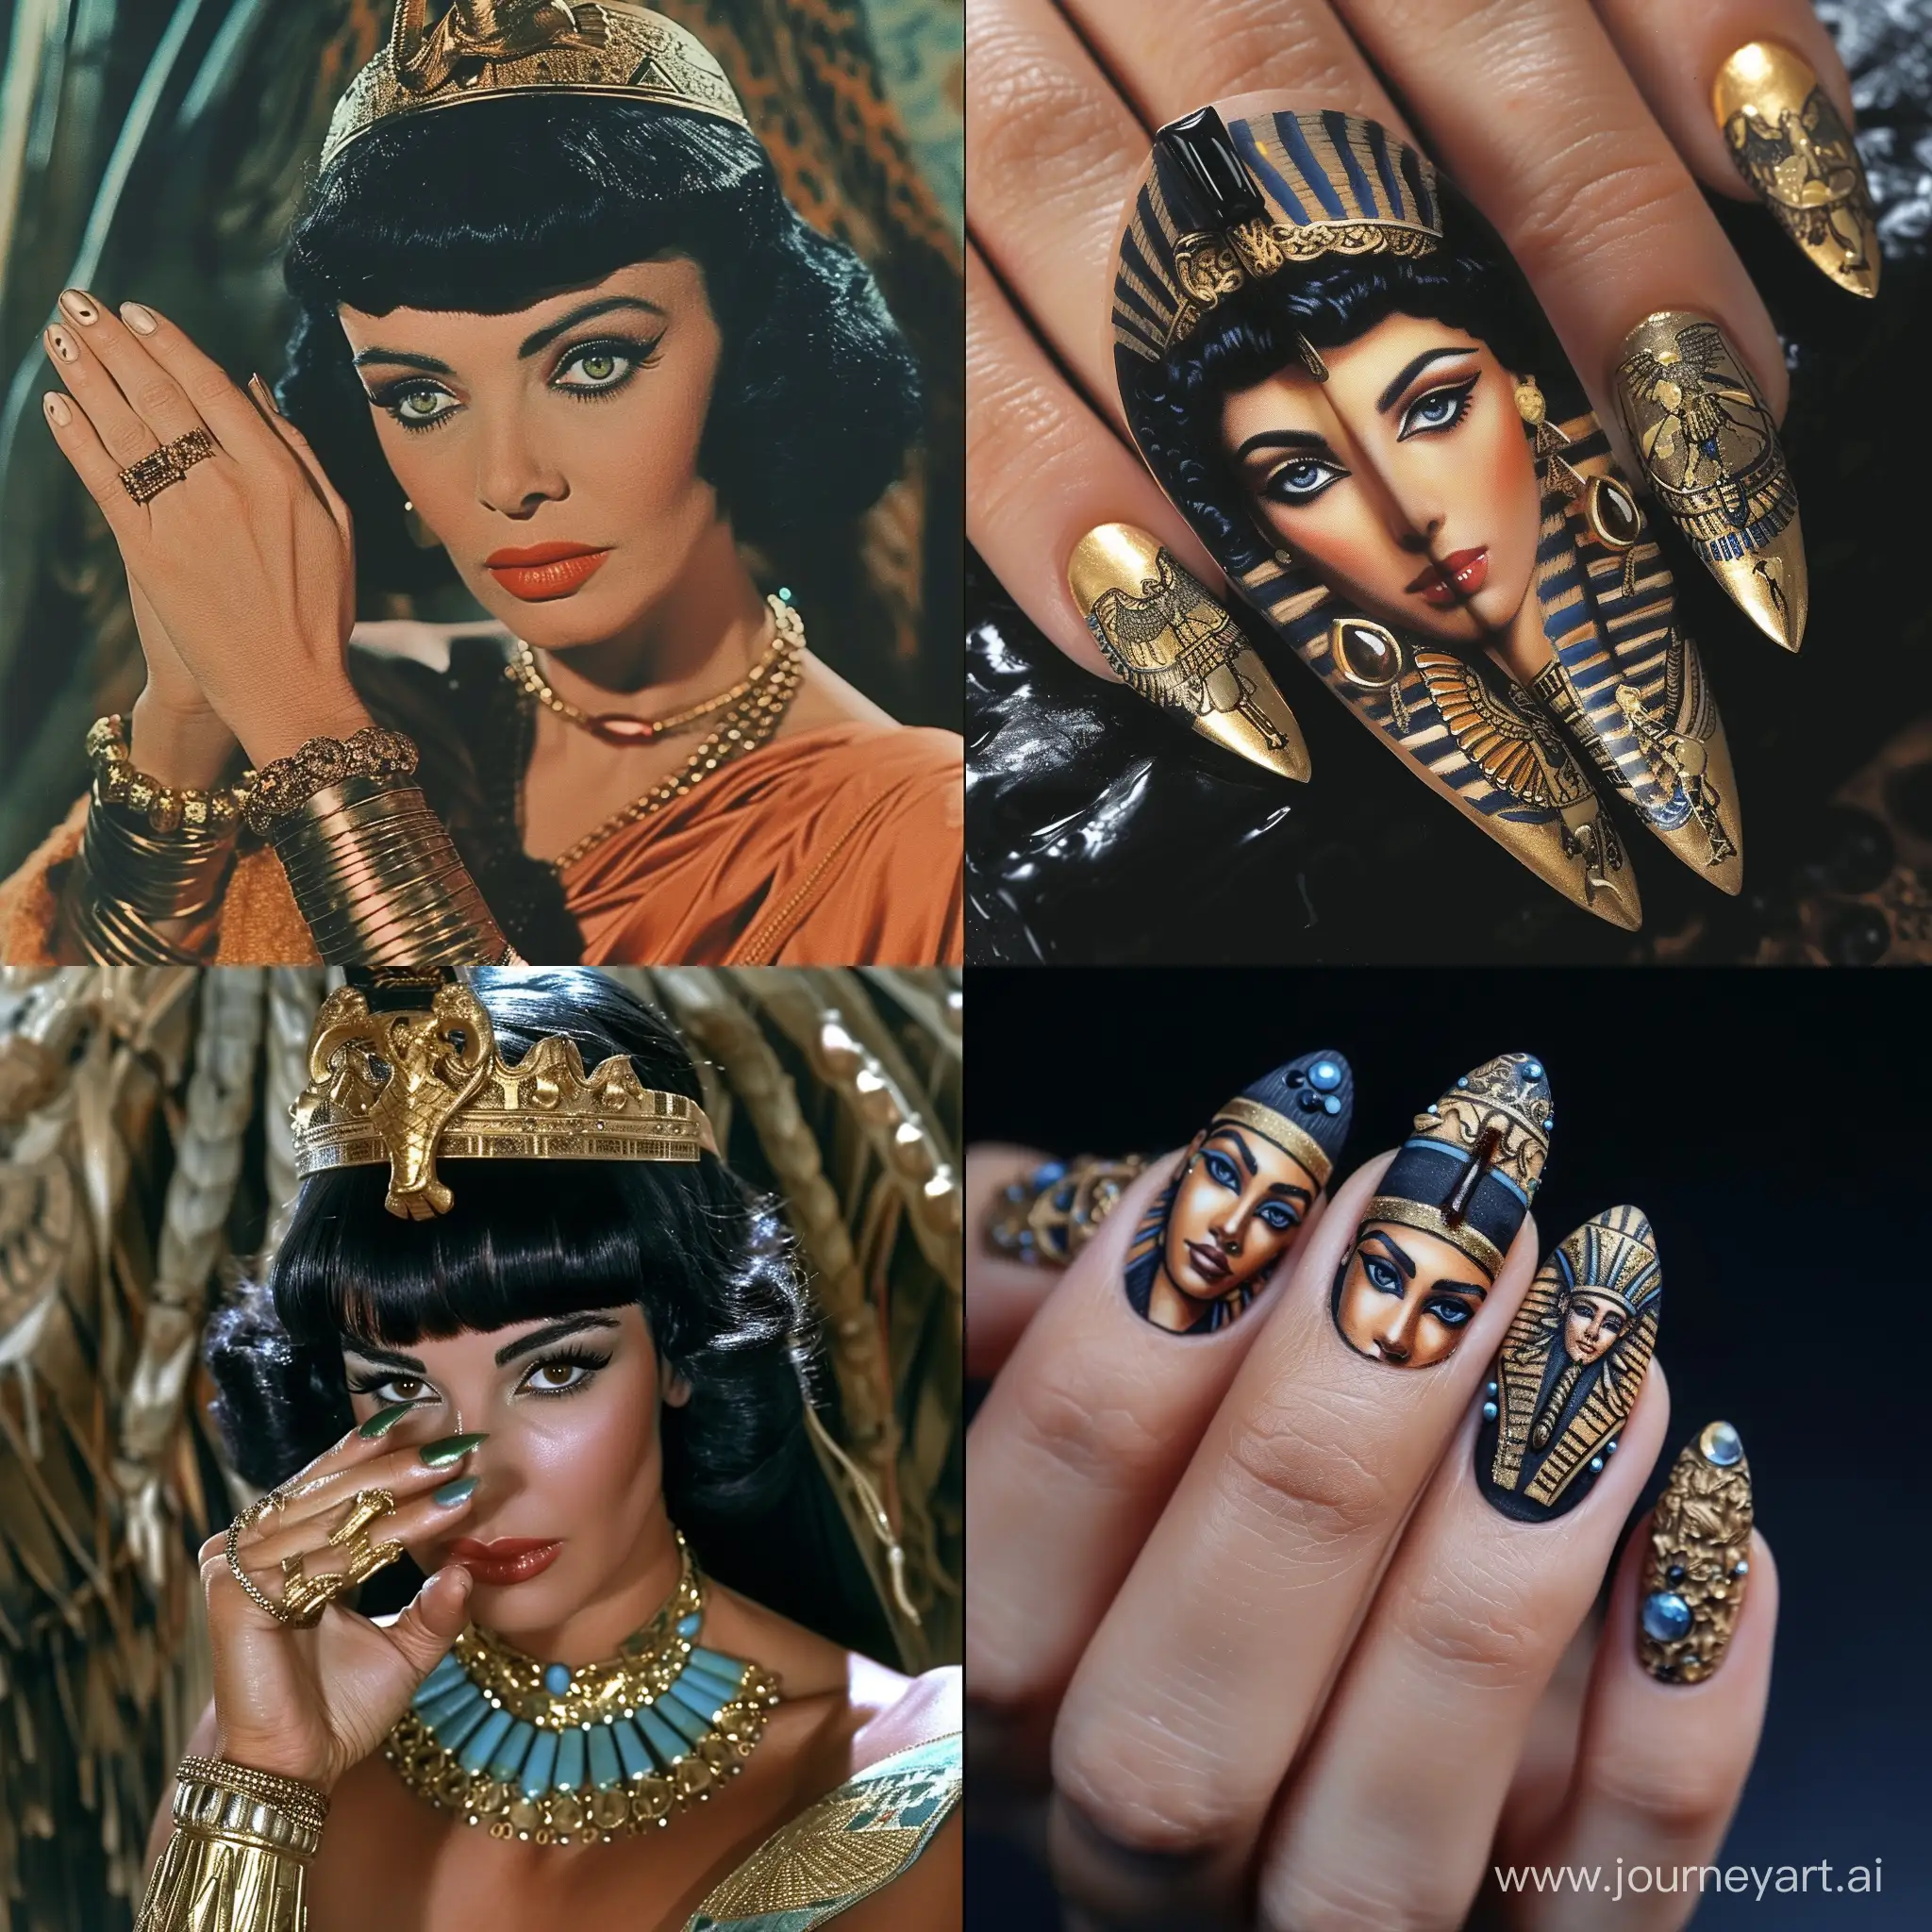 Cleopatras-Luxurious-Manicure-in-Opulent-Setting